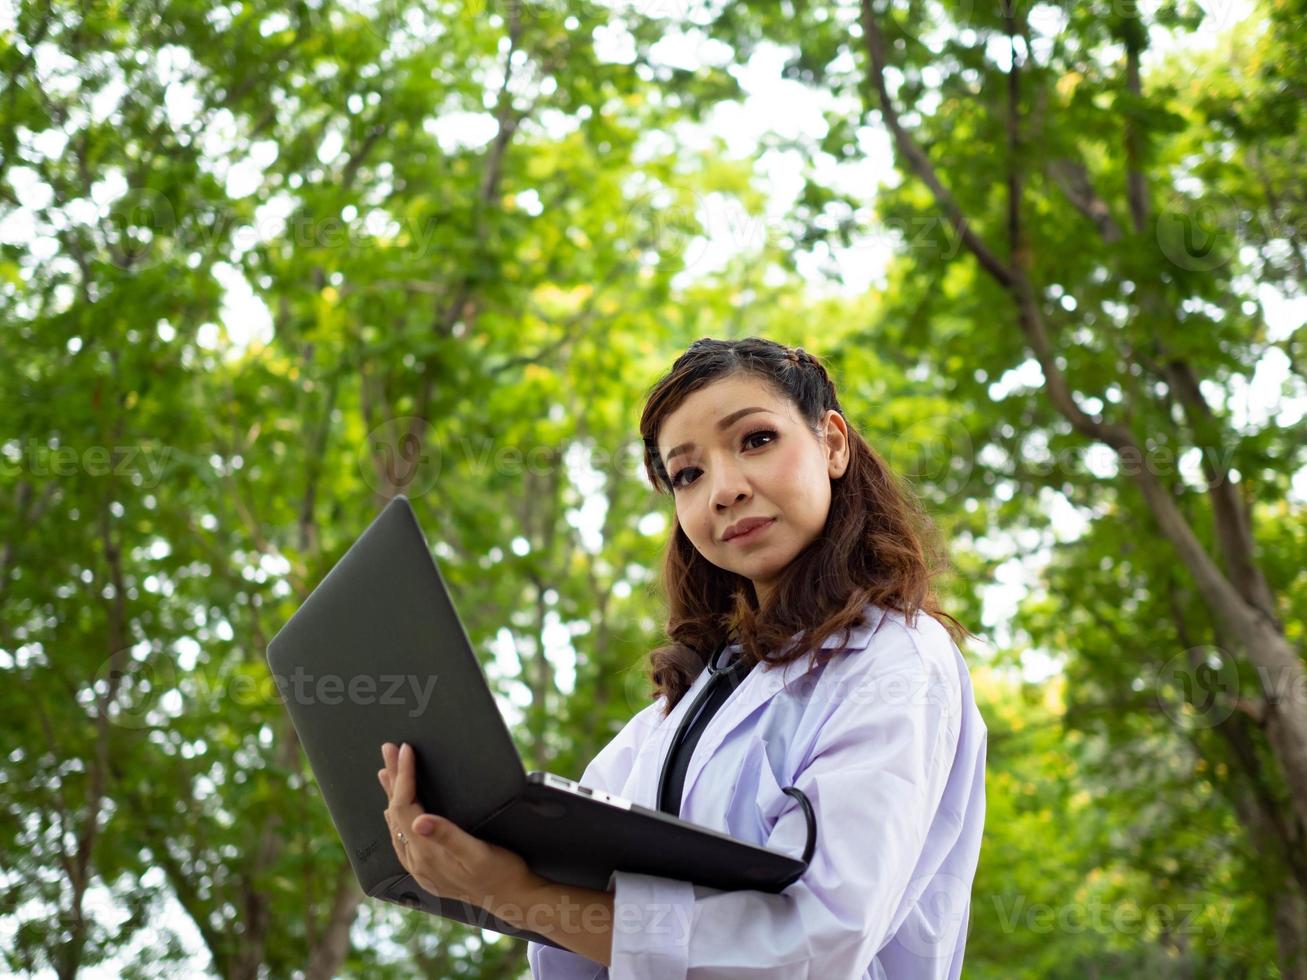 female woman lady beautiful pretty nurse doctor scientist holding notebook computer tablet looking camera outdoor garden natural research laboratory medical physician science health care medical photo